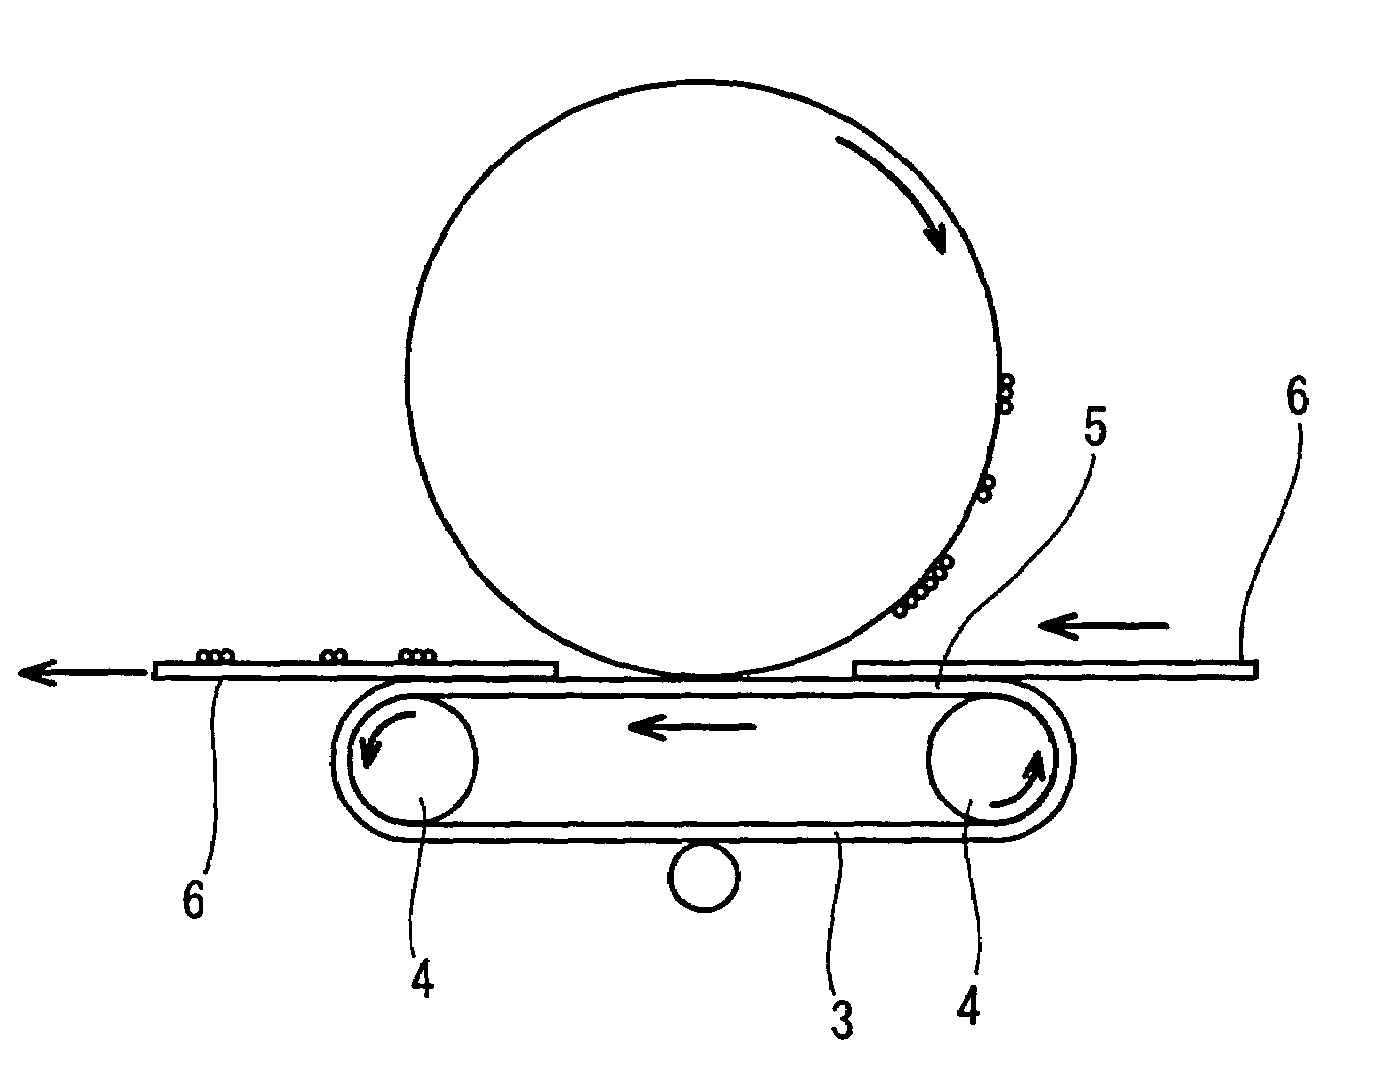 Conductive elastomer composition and method of producing same